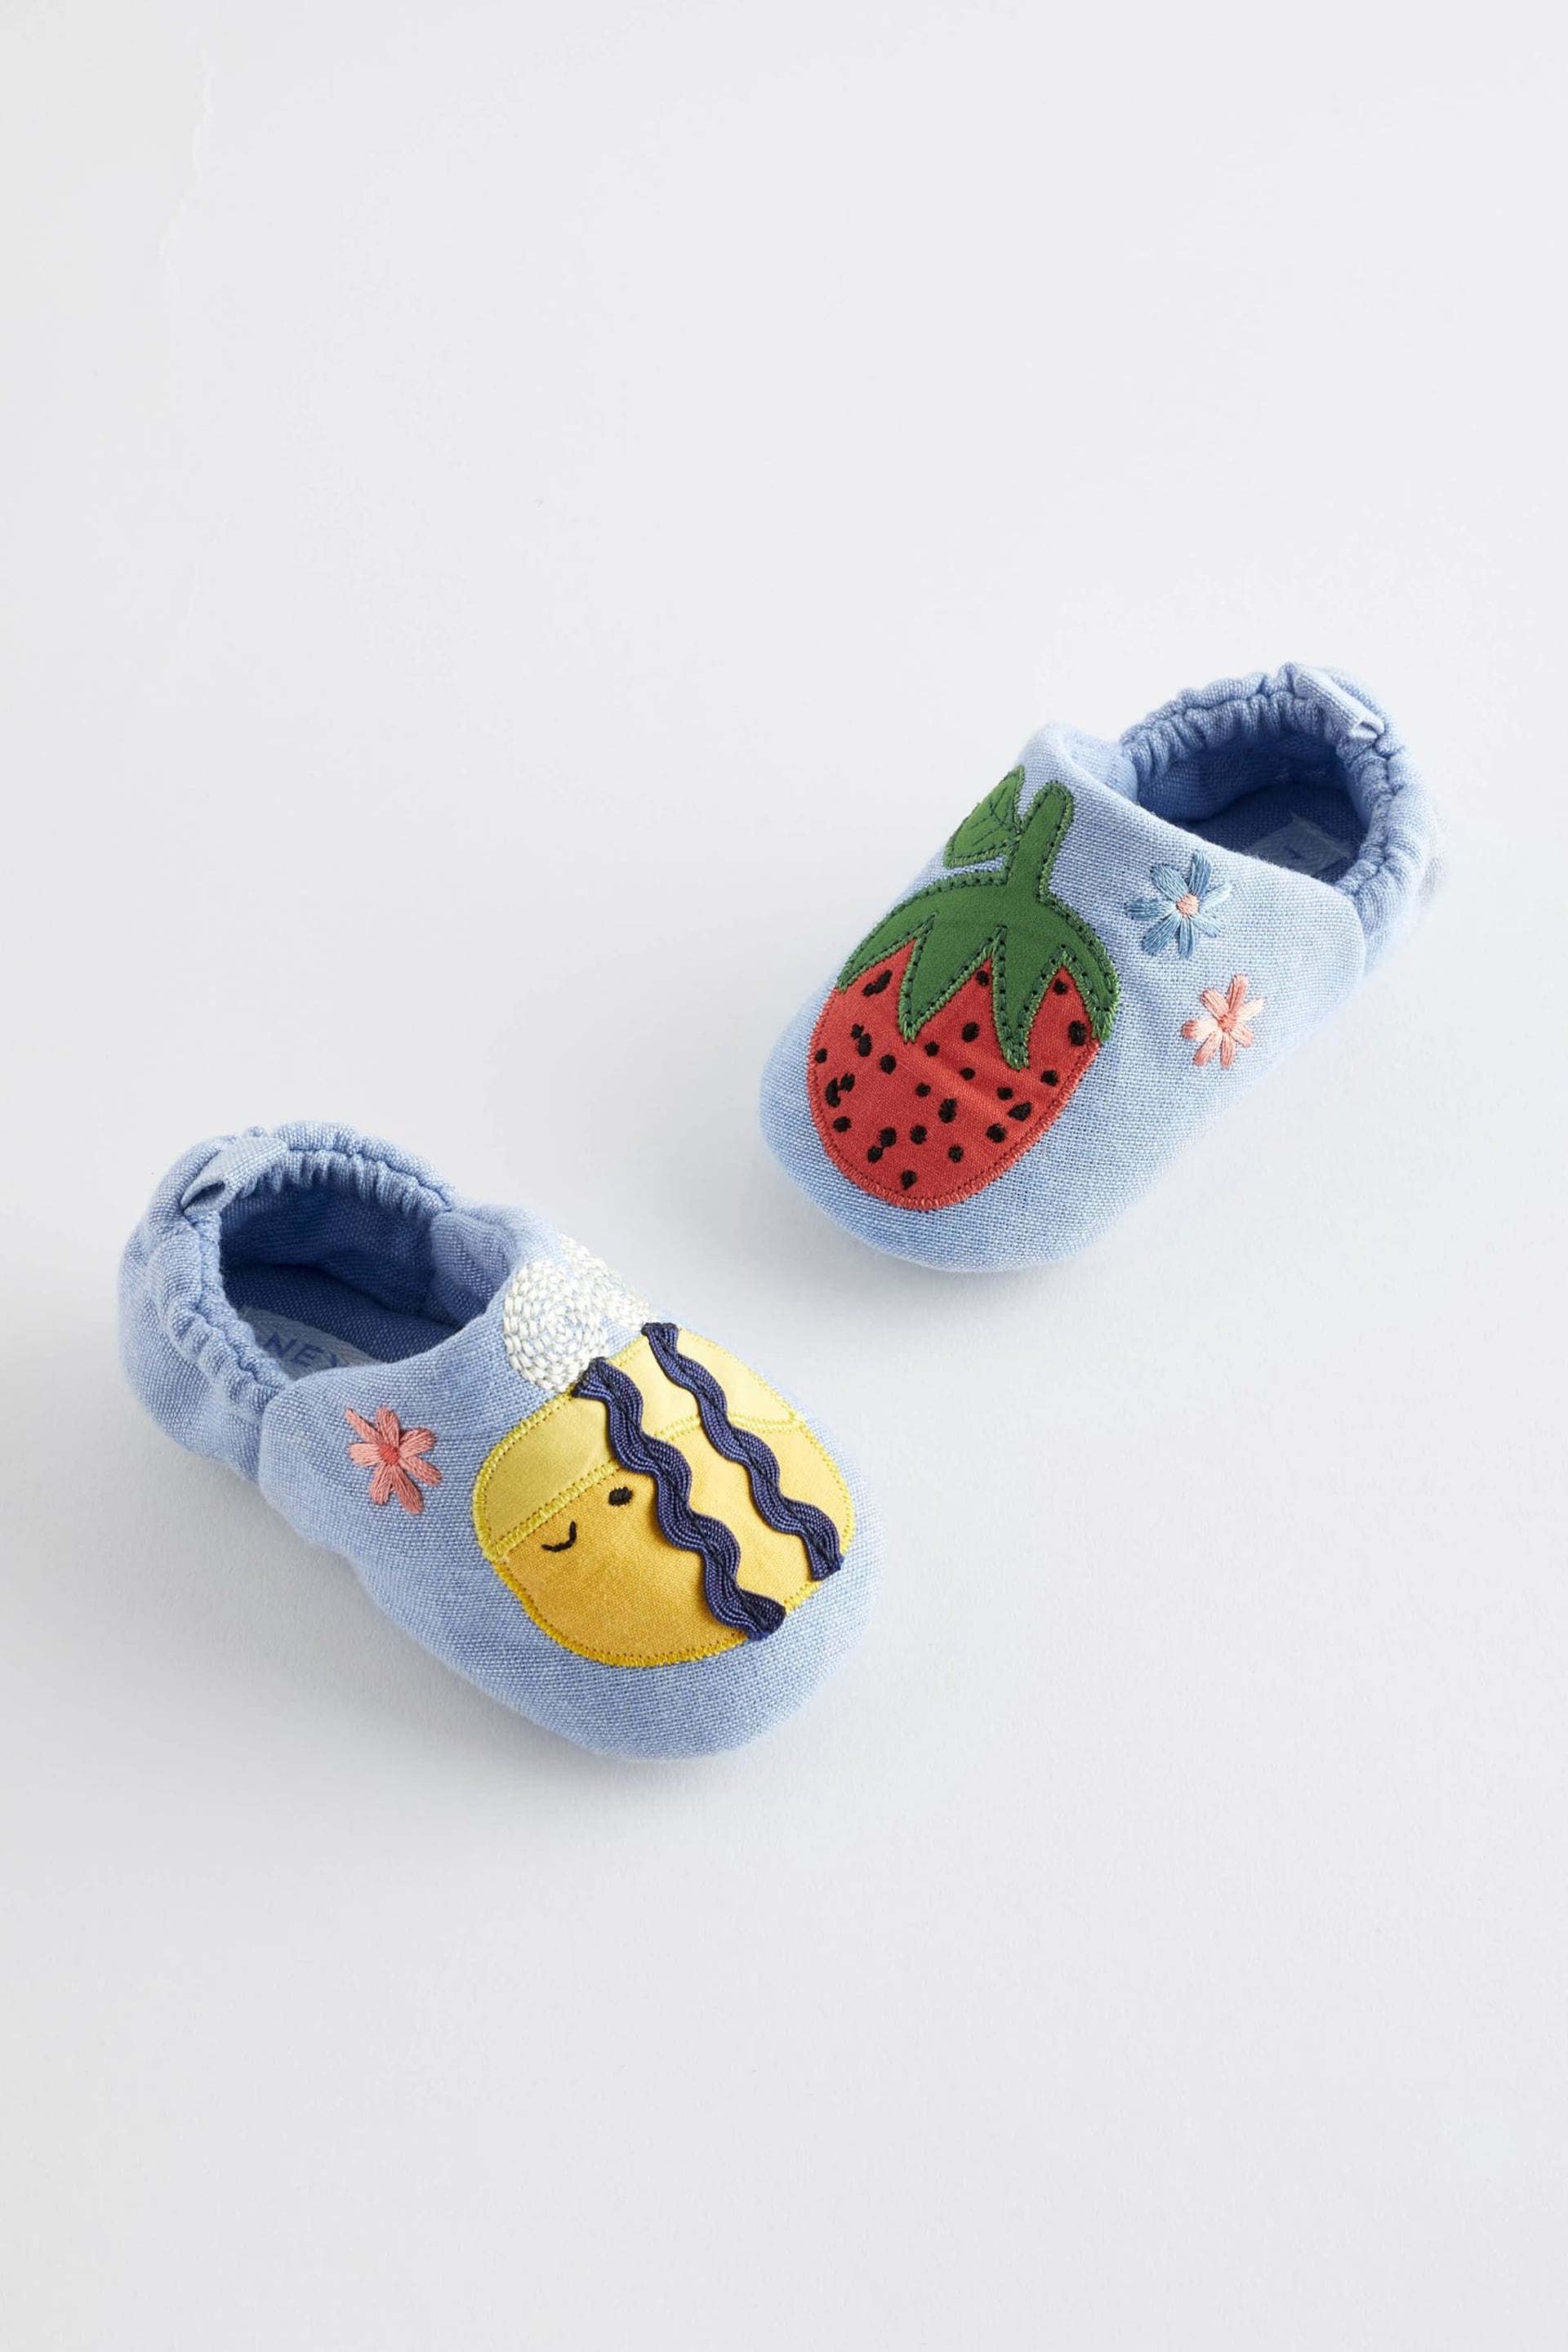 Denim Blue Character Slip-On Baby Shoes (0-24mths) - Image 1 of 9